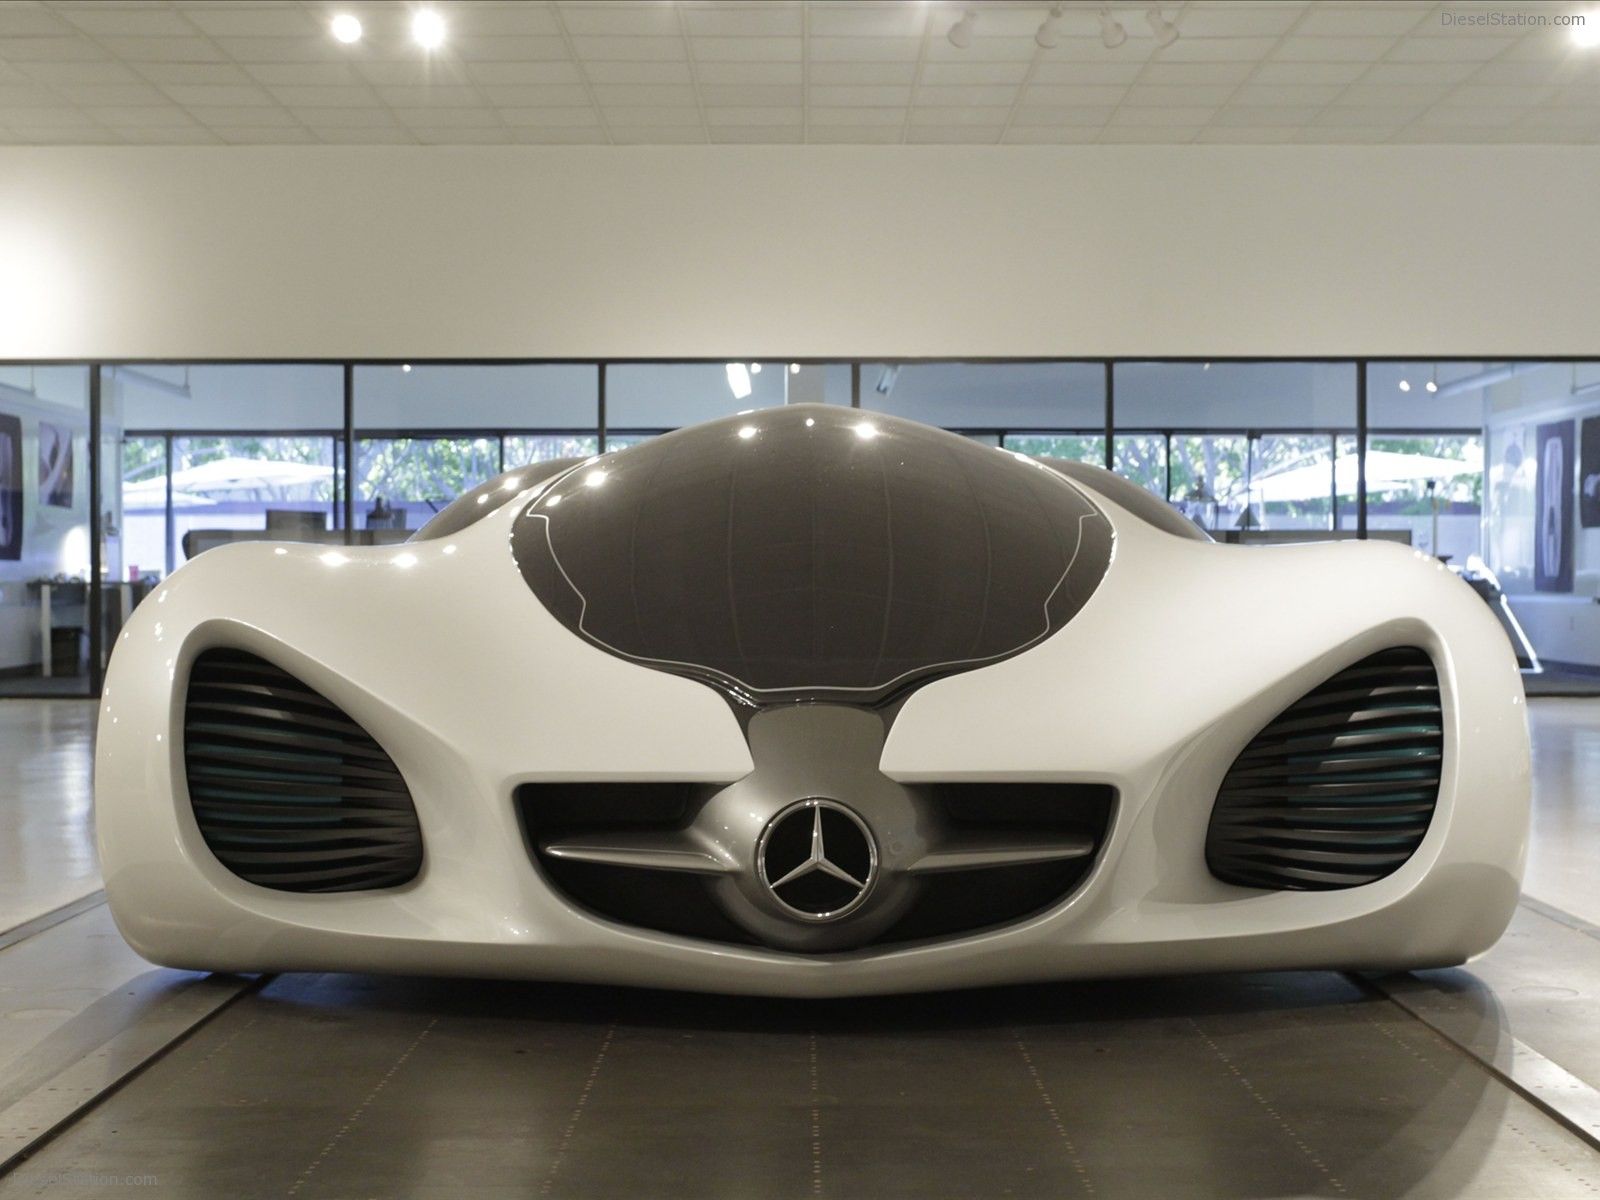 Mercedes Benz Biome Concept 2010 Exotic Car Wallpaper Of 22, Diesel Station